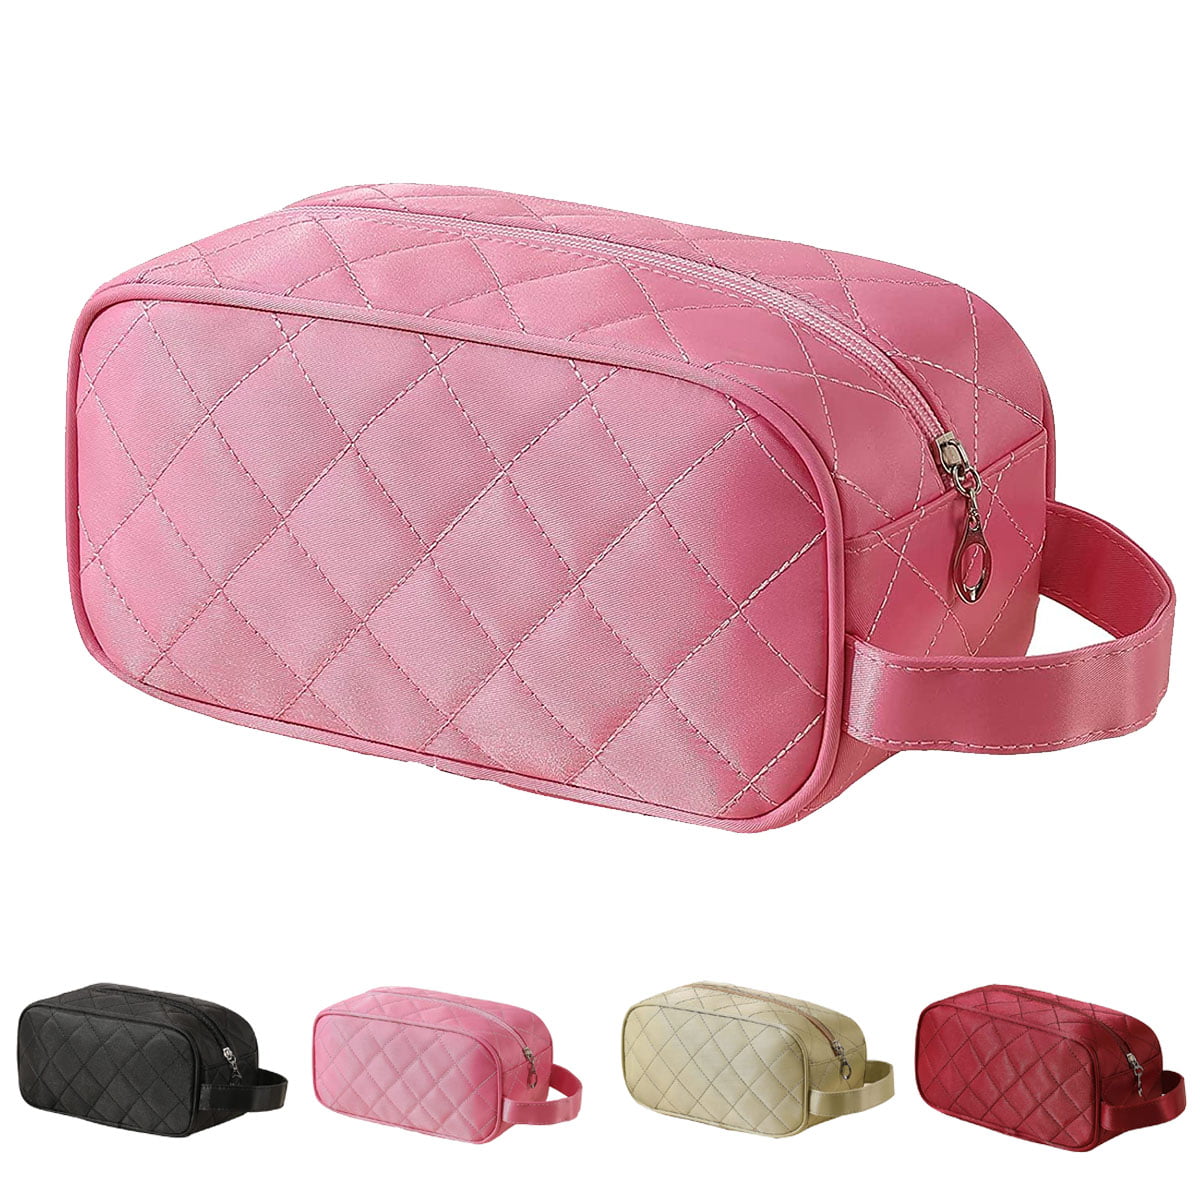 SoloTravel Portable Travel Makeup Cosmetic Bags Organizer Multifunction  Case Travel Bags for Women - Pink Color